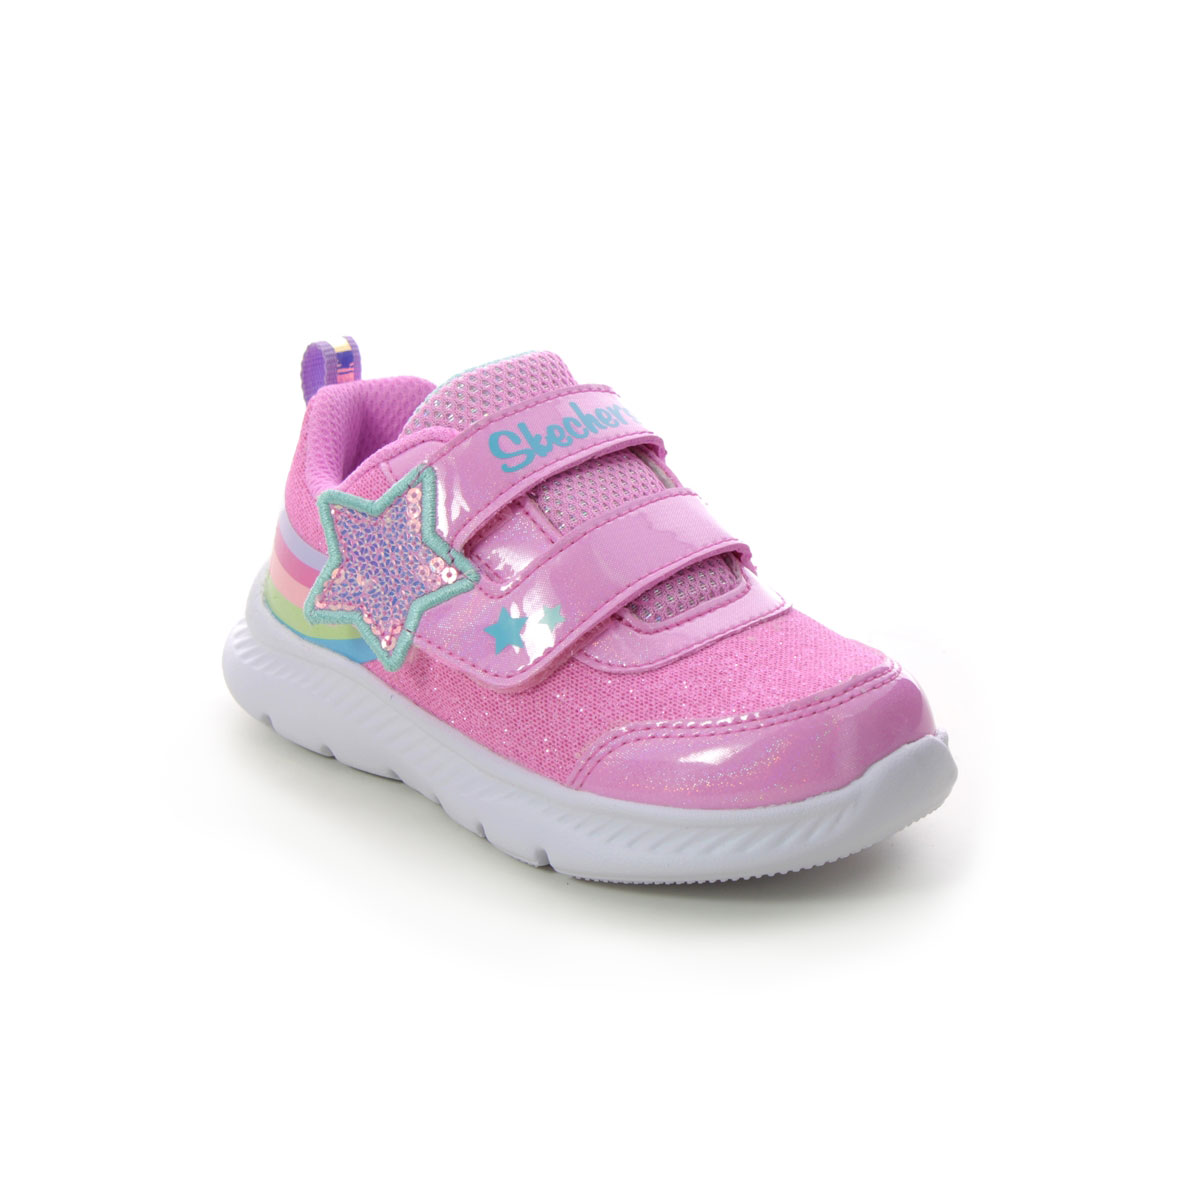 Skechers Comfy Flex Velcro Pink Kids Girls Trainers 302711N In Size 23 In Plain Pink For kids